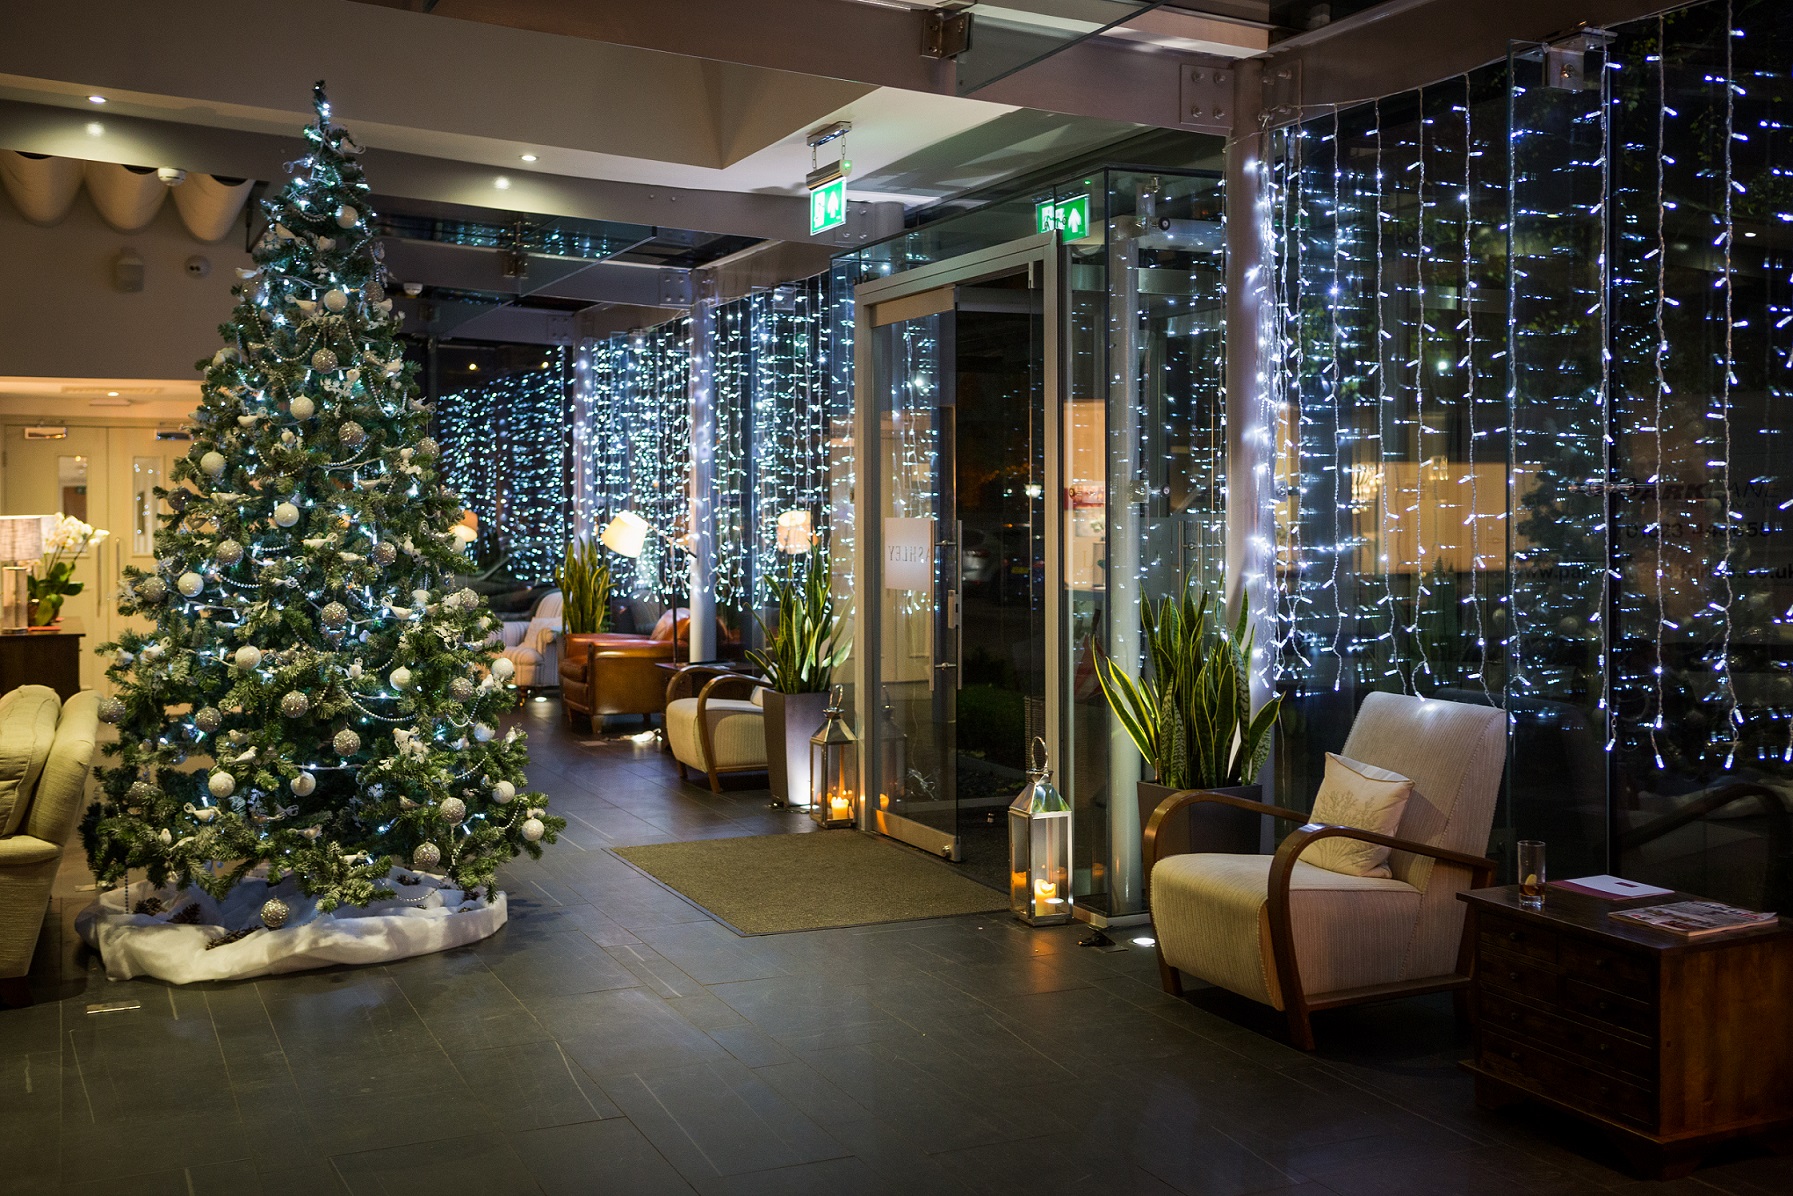 Lake District Christmas | The Belsfield Hotel